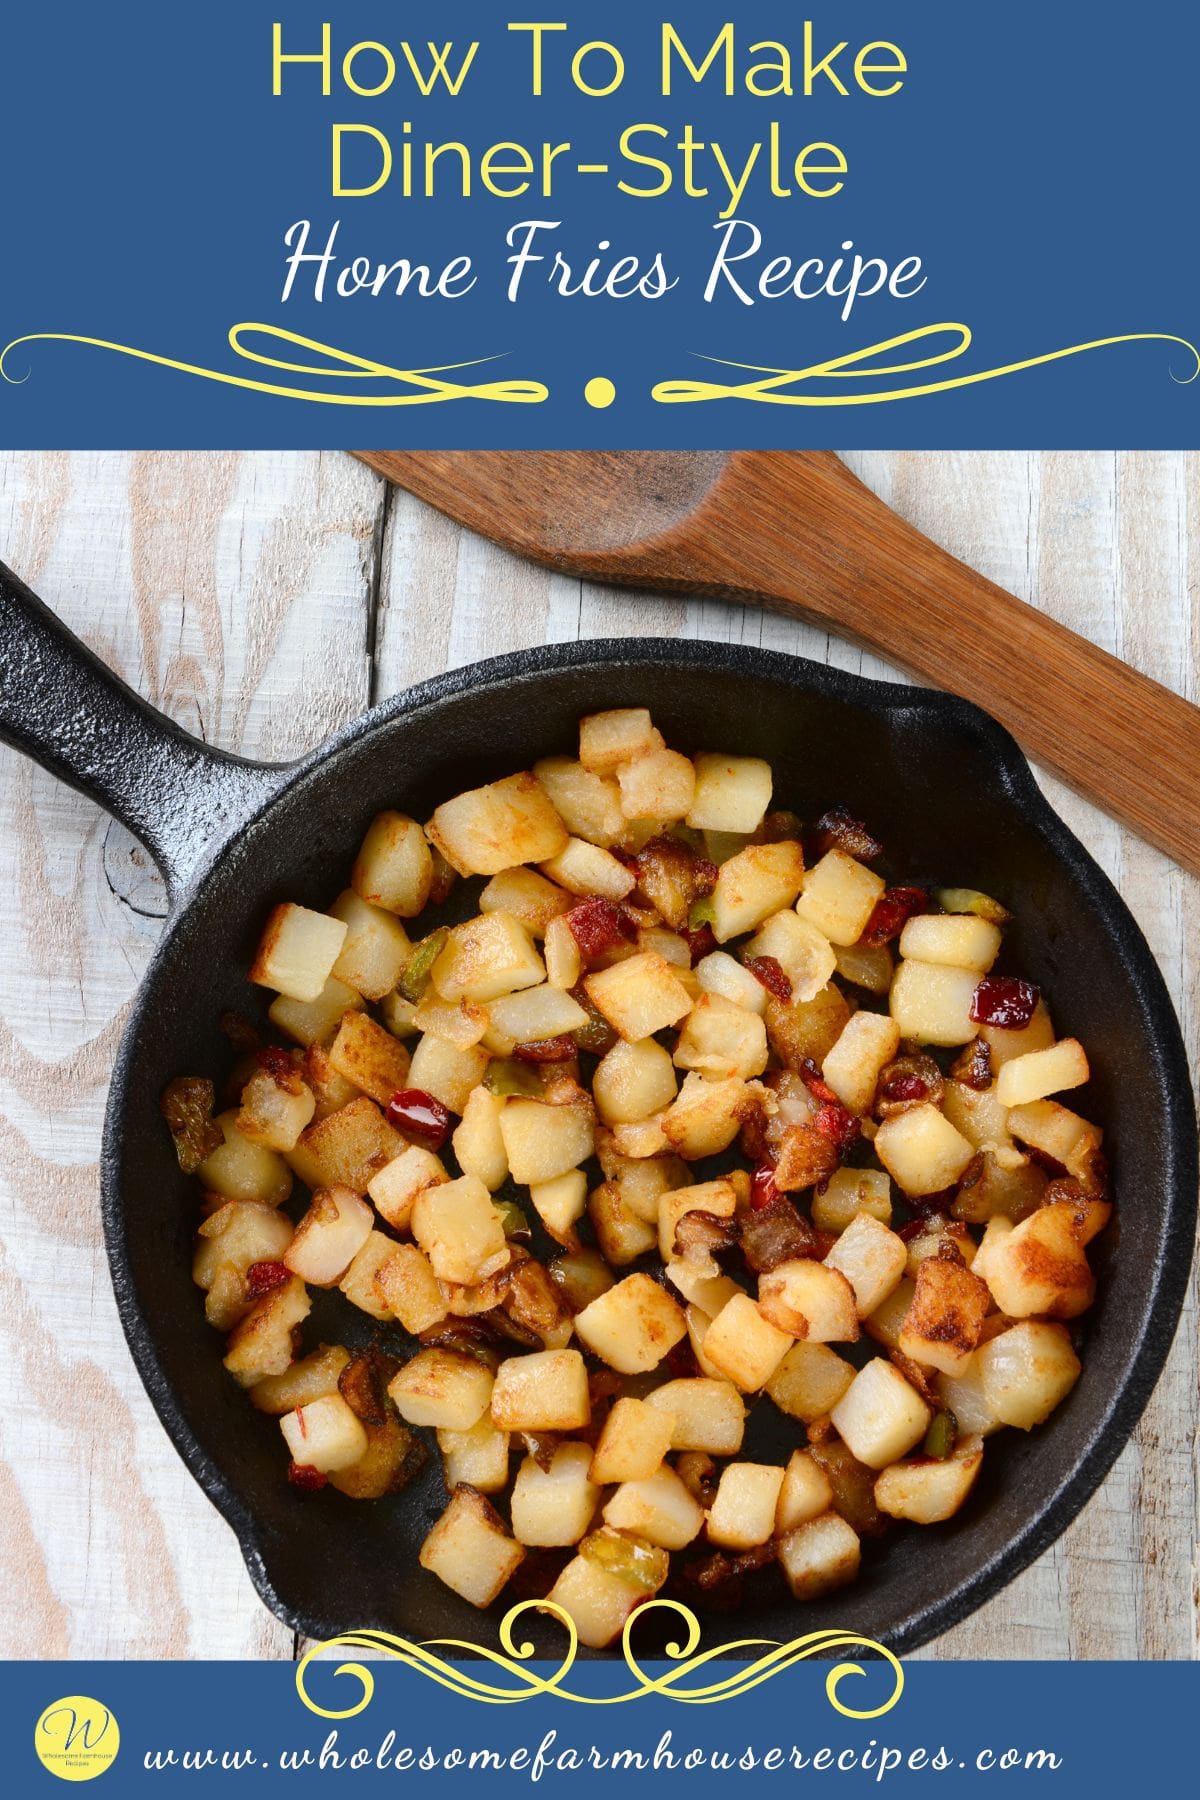 How To Make Diner-Style Home Fries Recipe